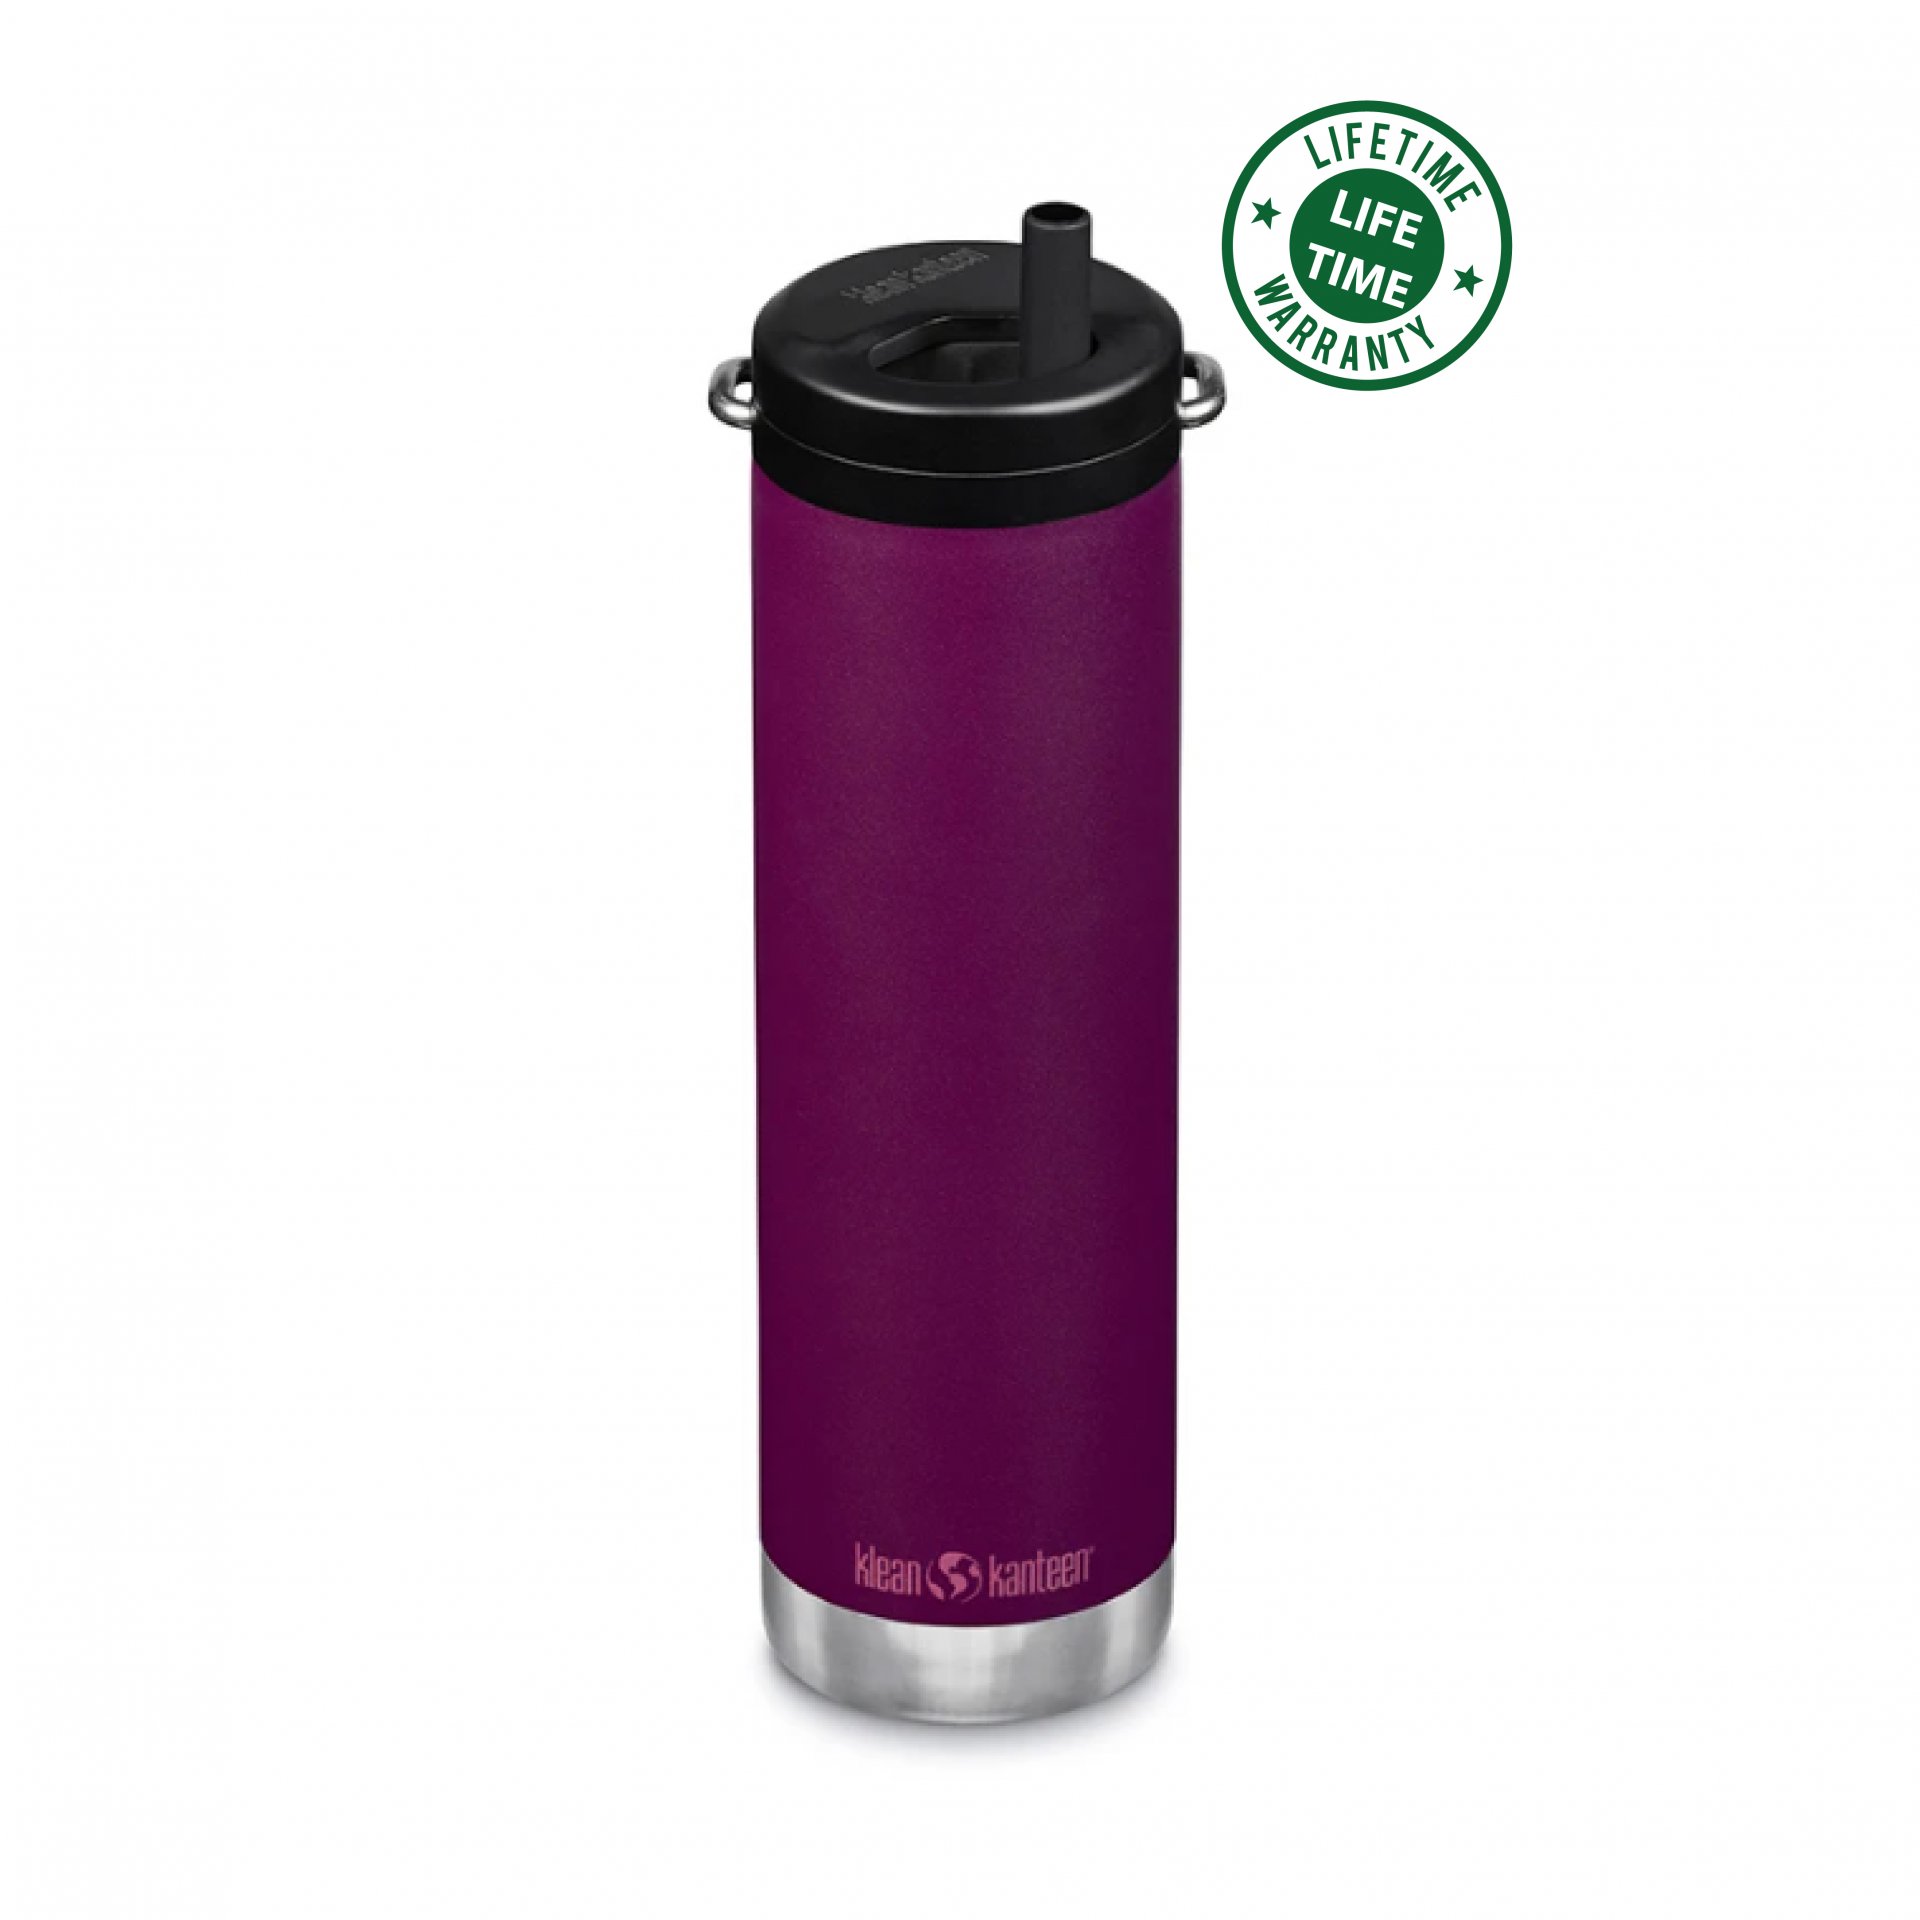 Klean Kanteen 20 oz.Insulated with Twist Cap Purple Potion